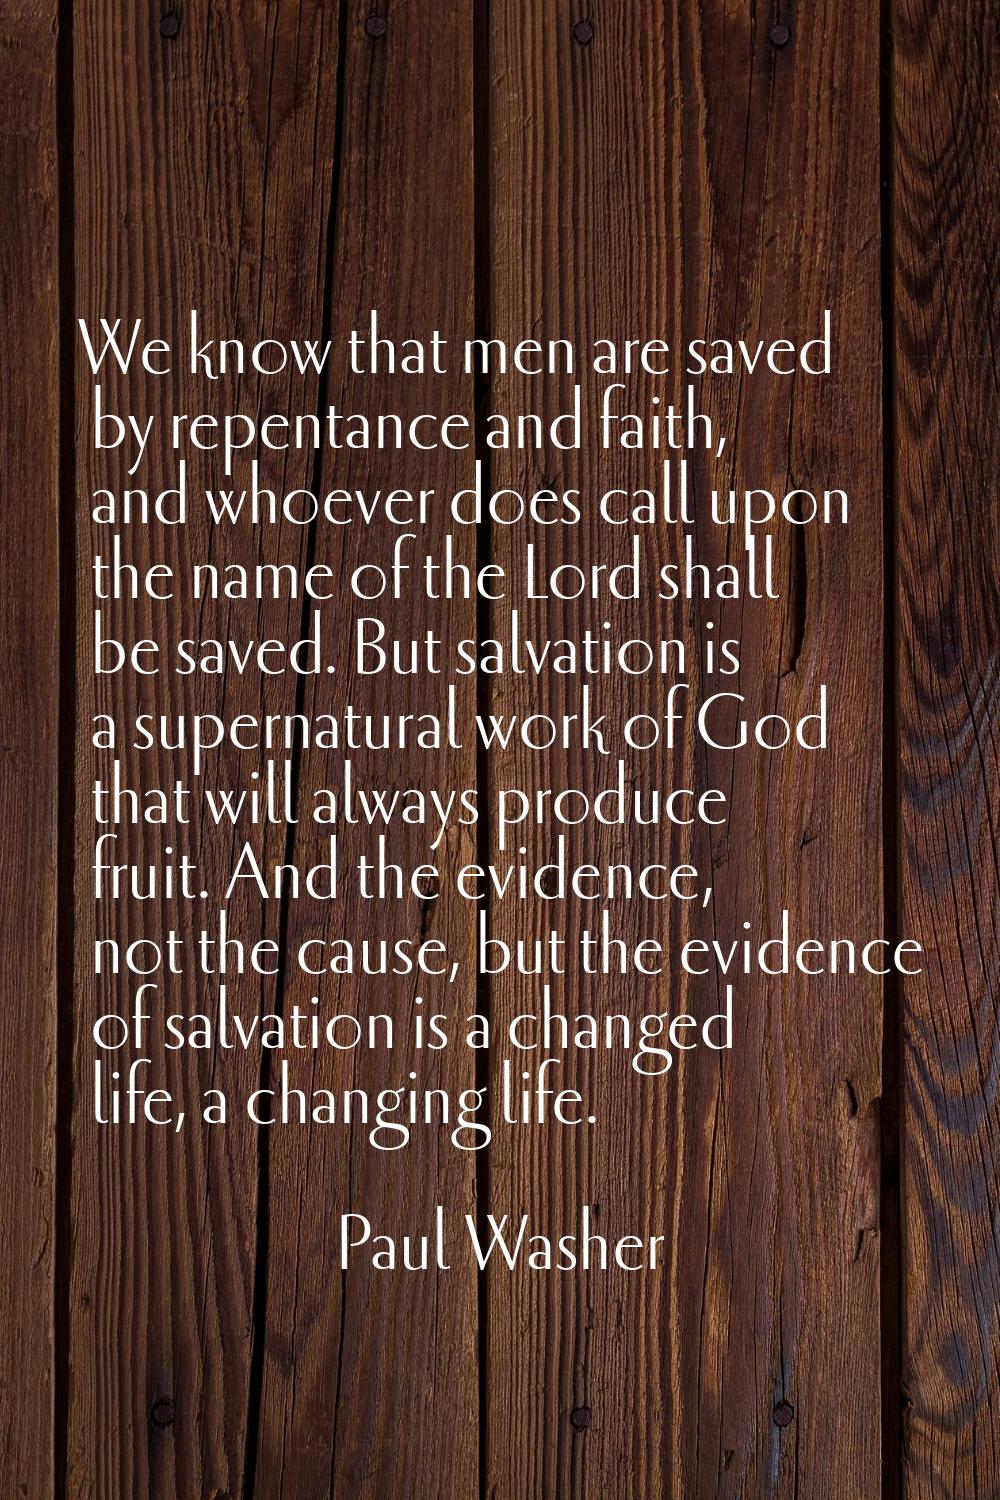 We know that men are saved by repentance and faith, and whoever does call upon the name of the Lord